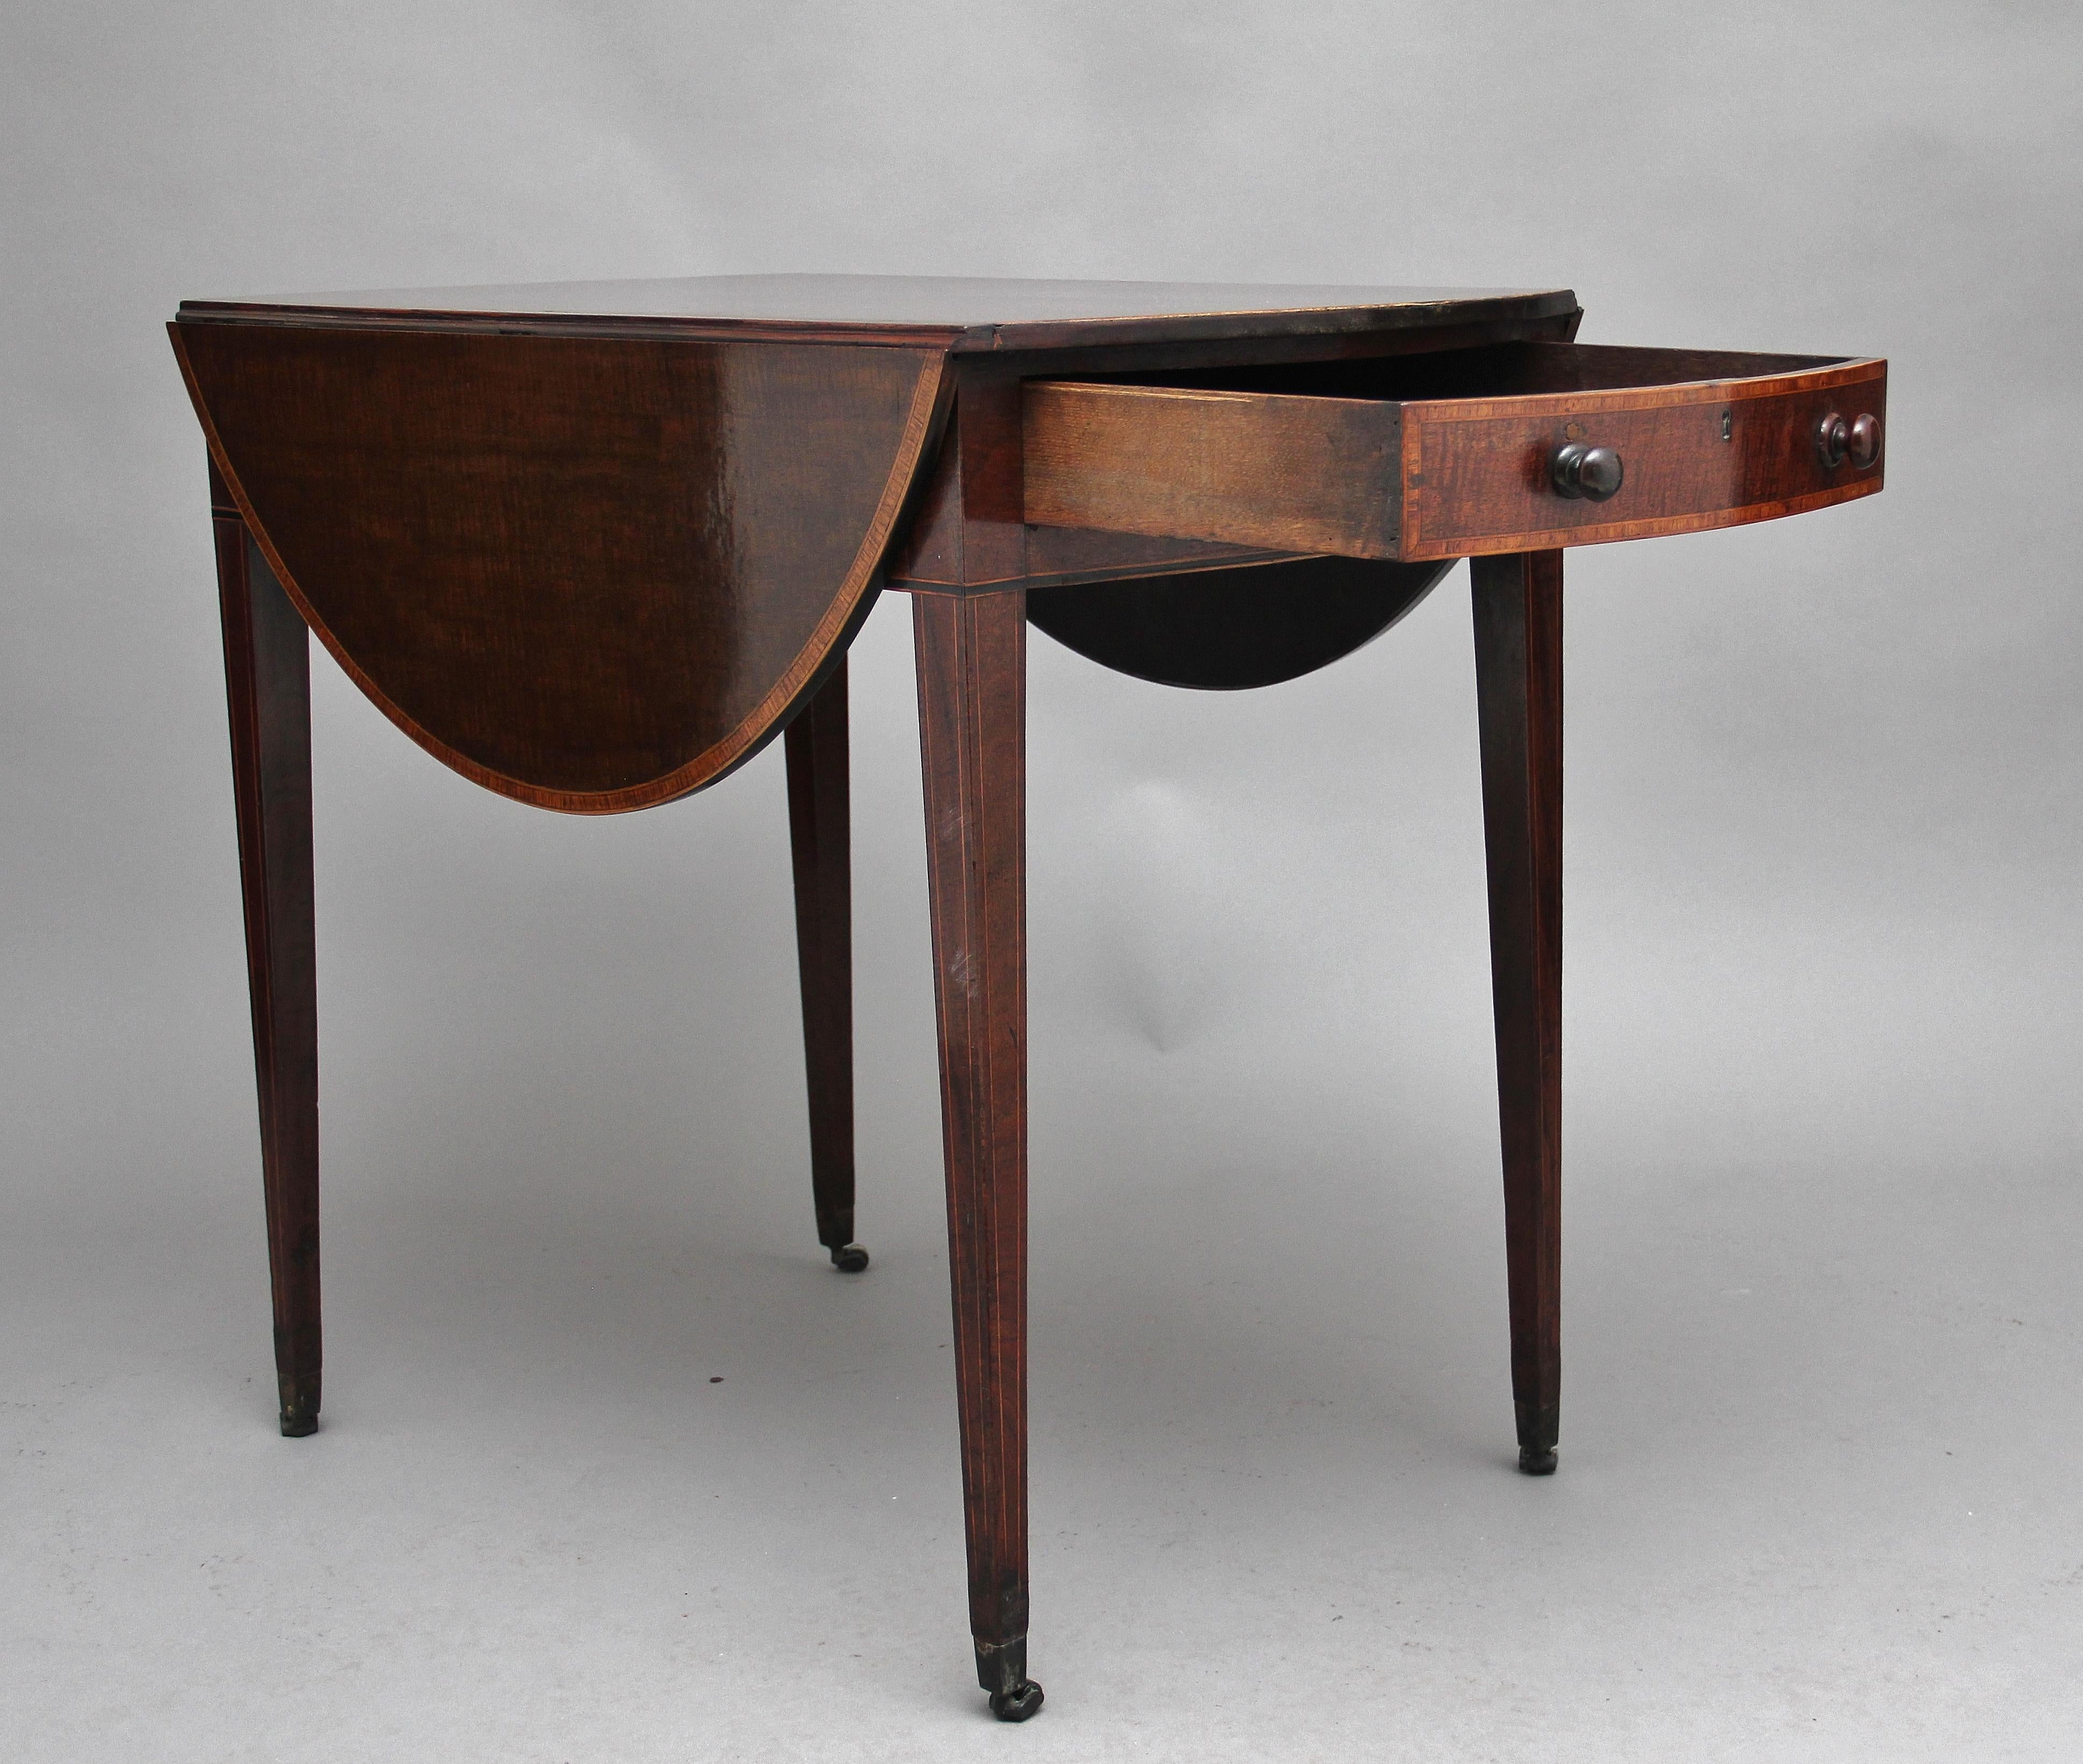 Early 19th century mahogany Pembroke table, the lovely figured, crossbanded drop leaf top, a single oak lined drawer at one end with original turned wooden knob handles, the drawer front also crossbanded, supported on four tapering legs with inlay